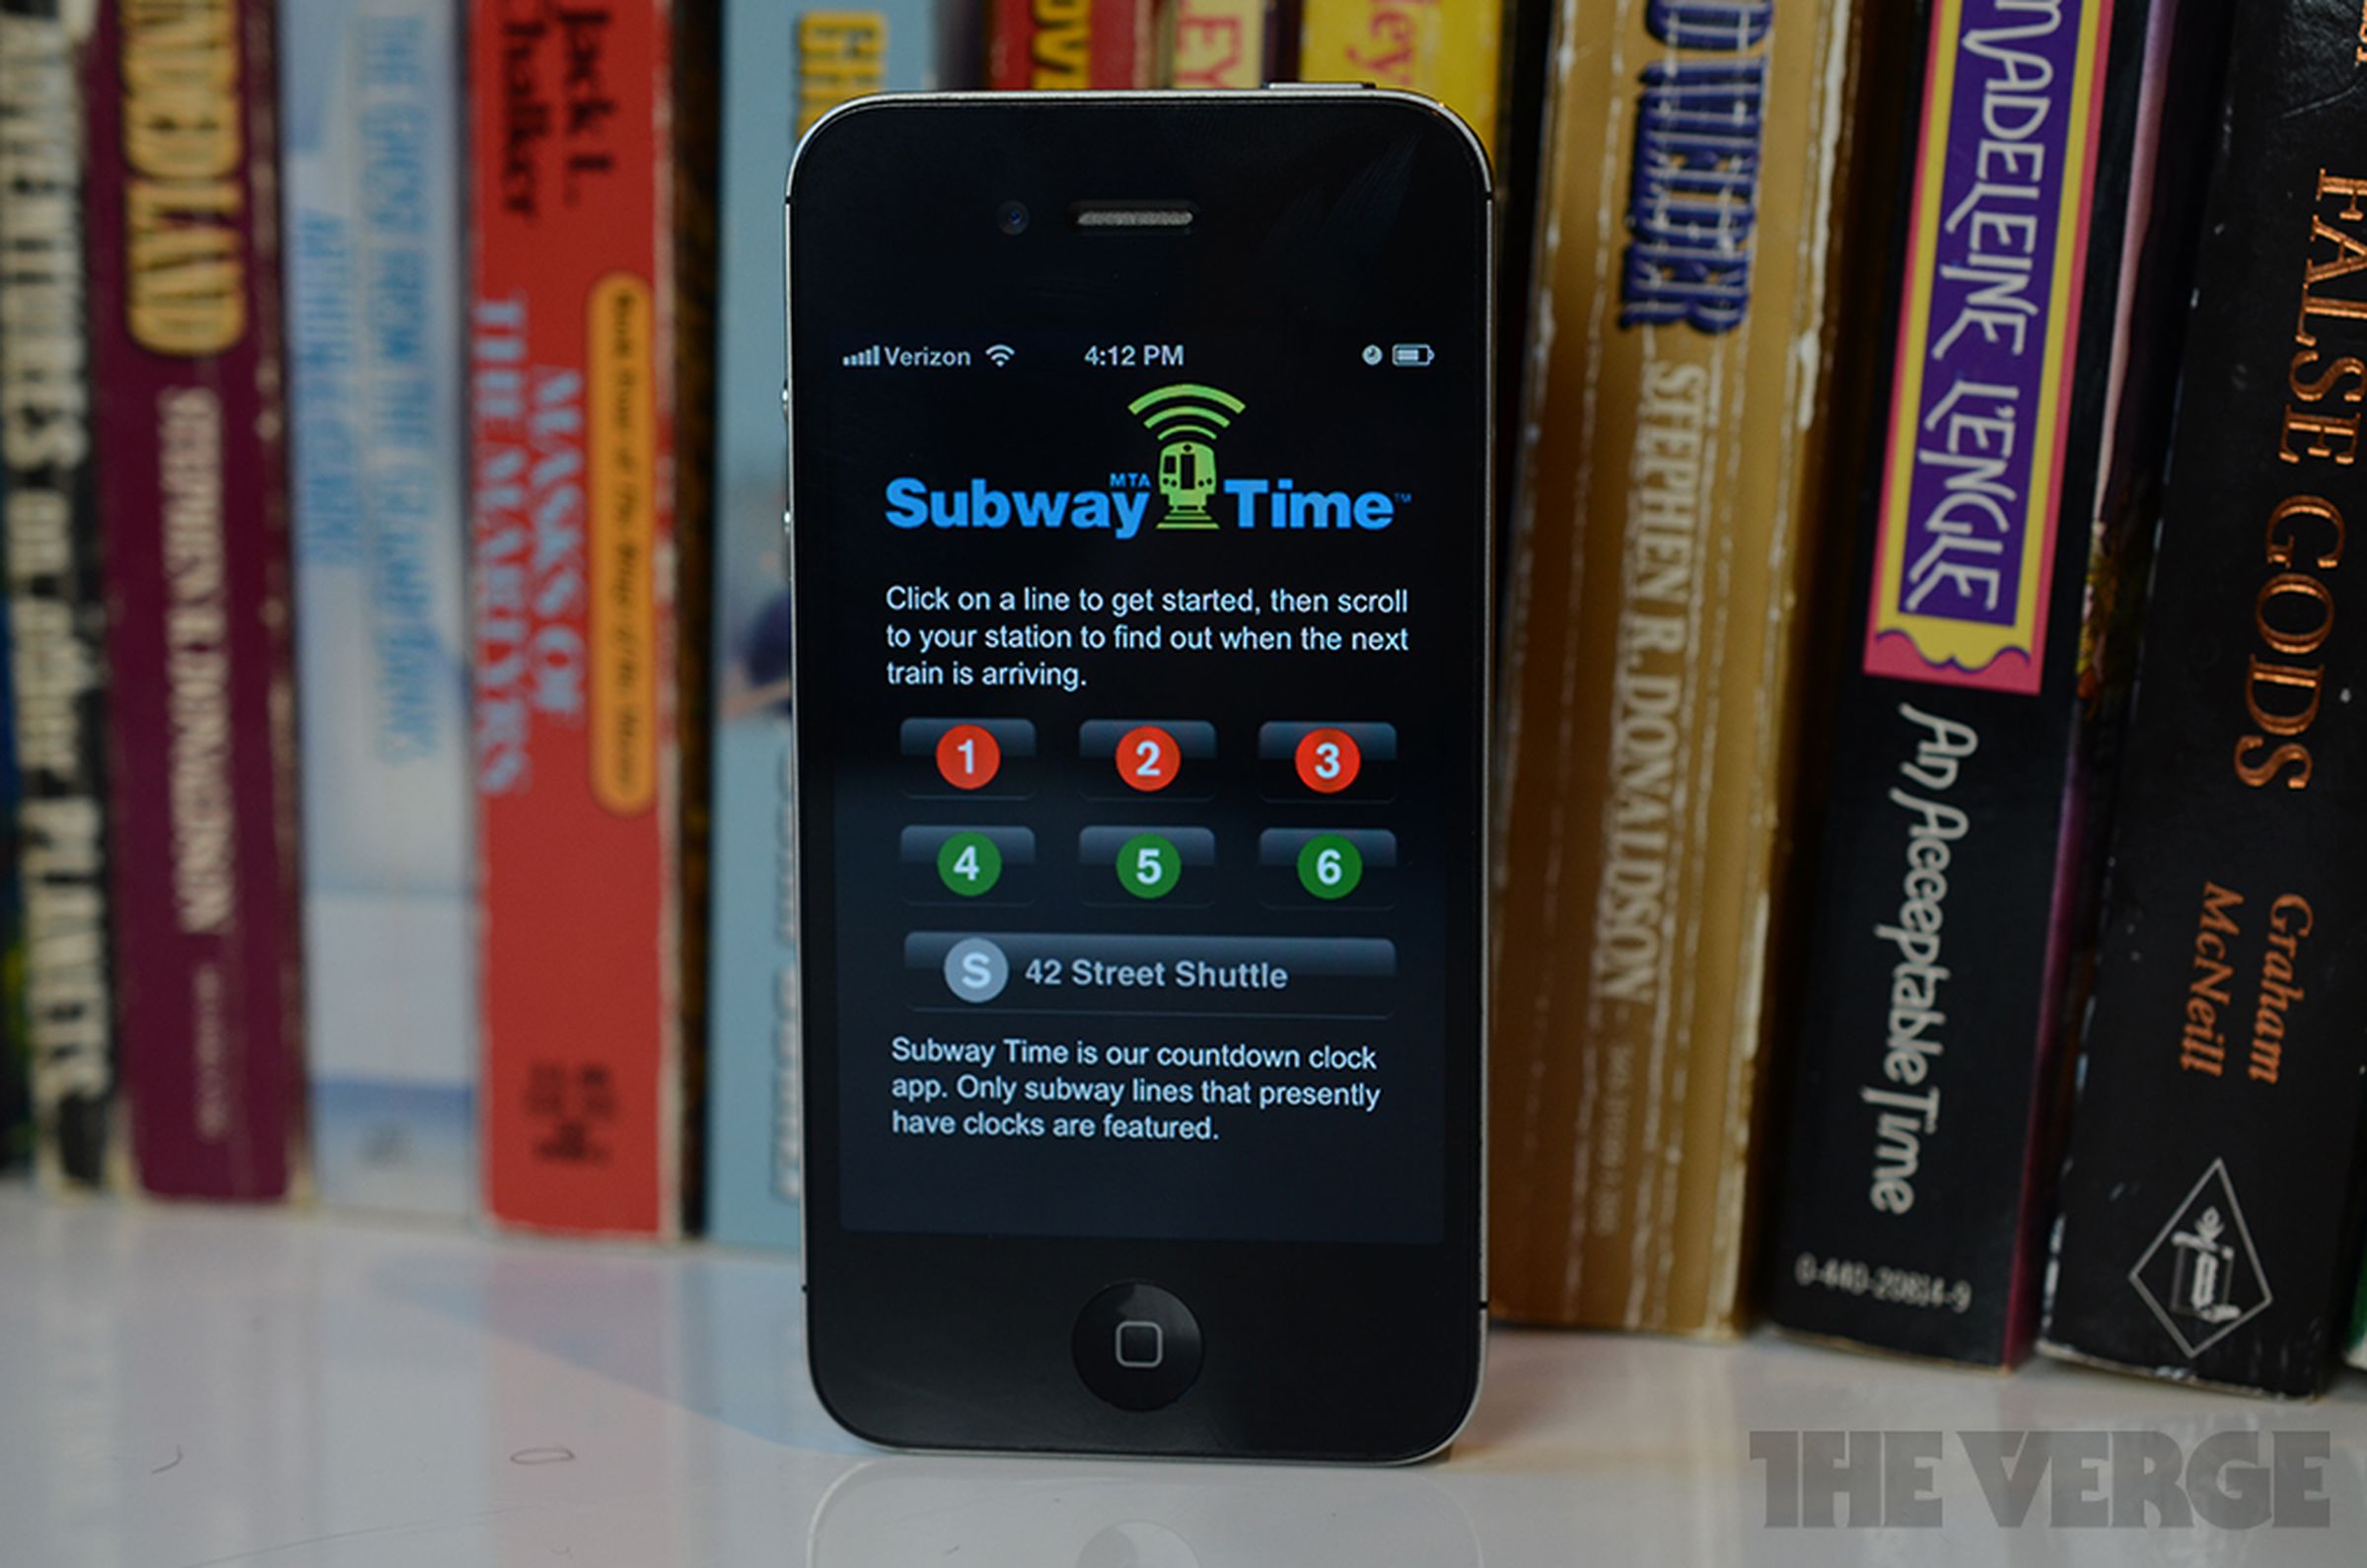 MTA Subway Time app hands-on pictures